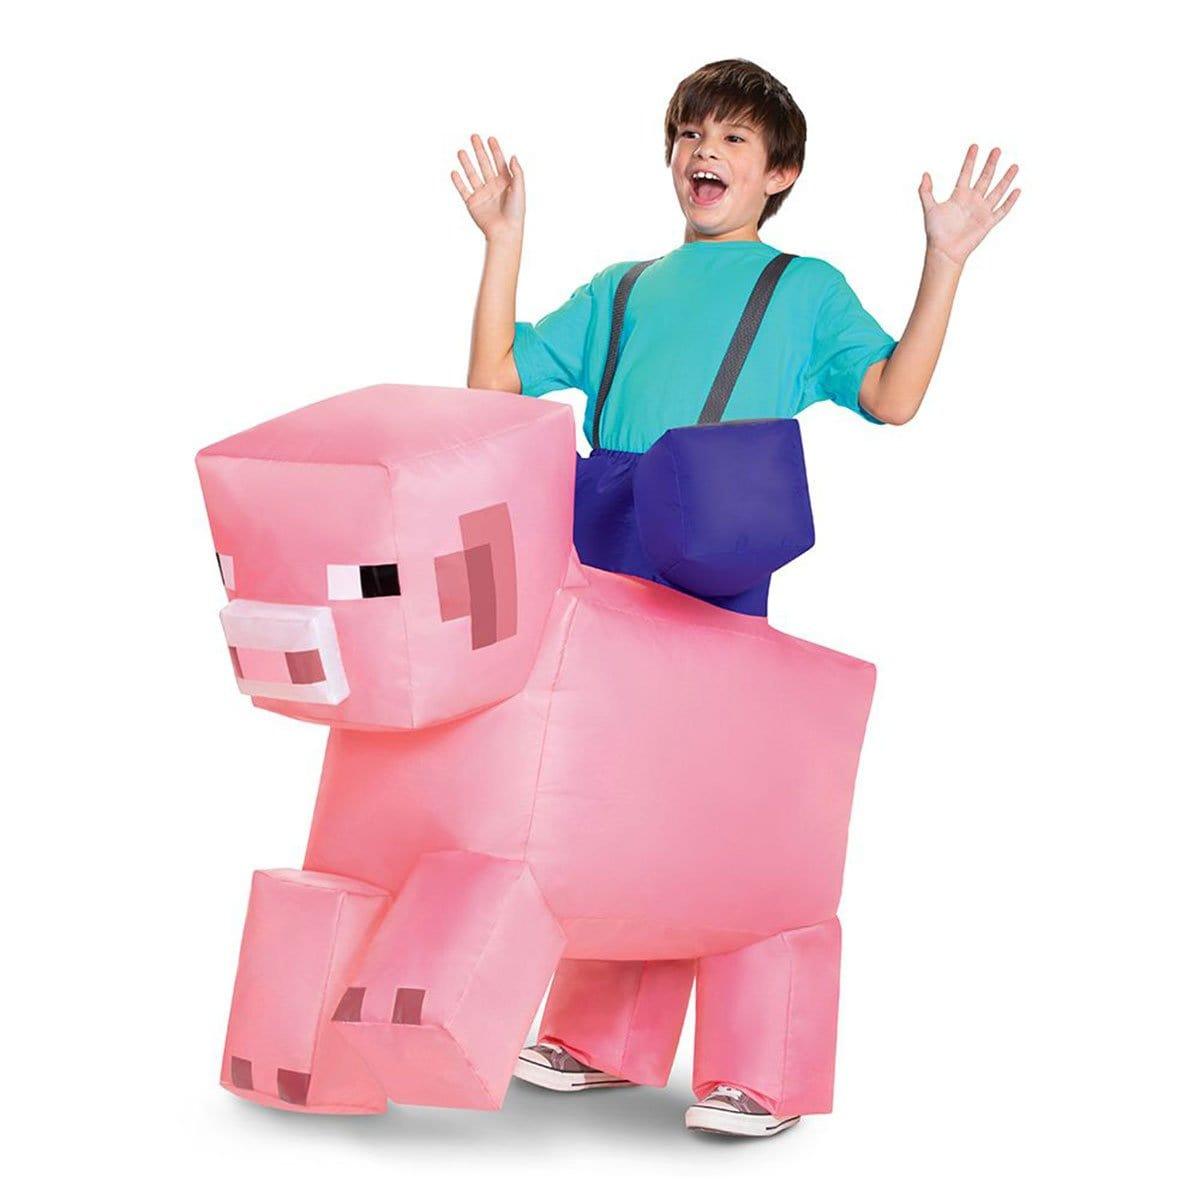 Buy Costumes Pig Ride-On Inflatable Costume For Kids, Minecraft sold at Party Expert